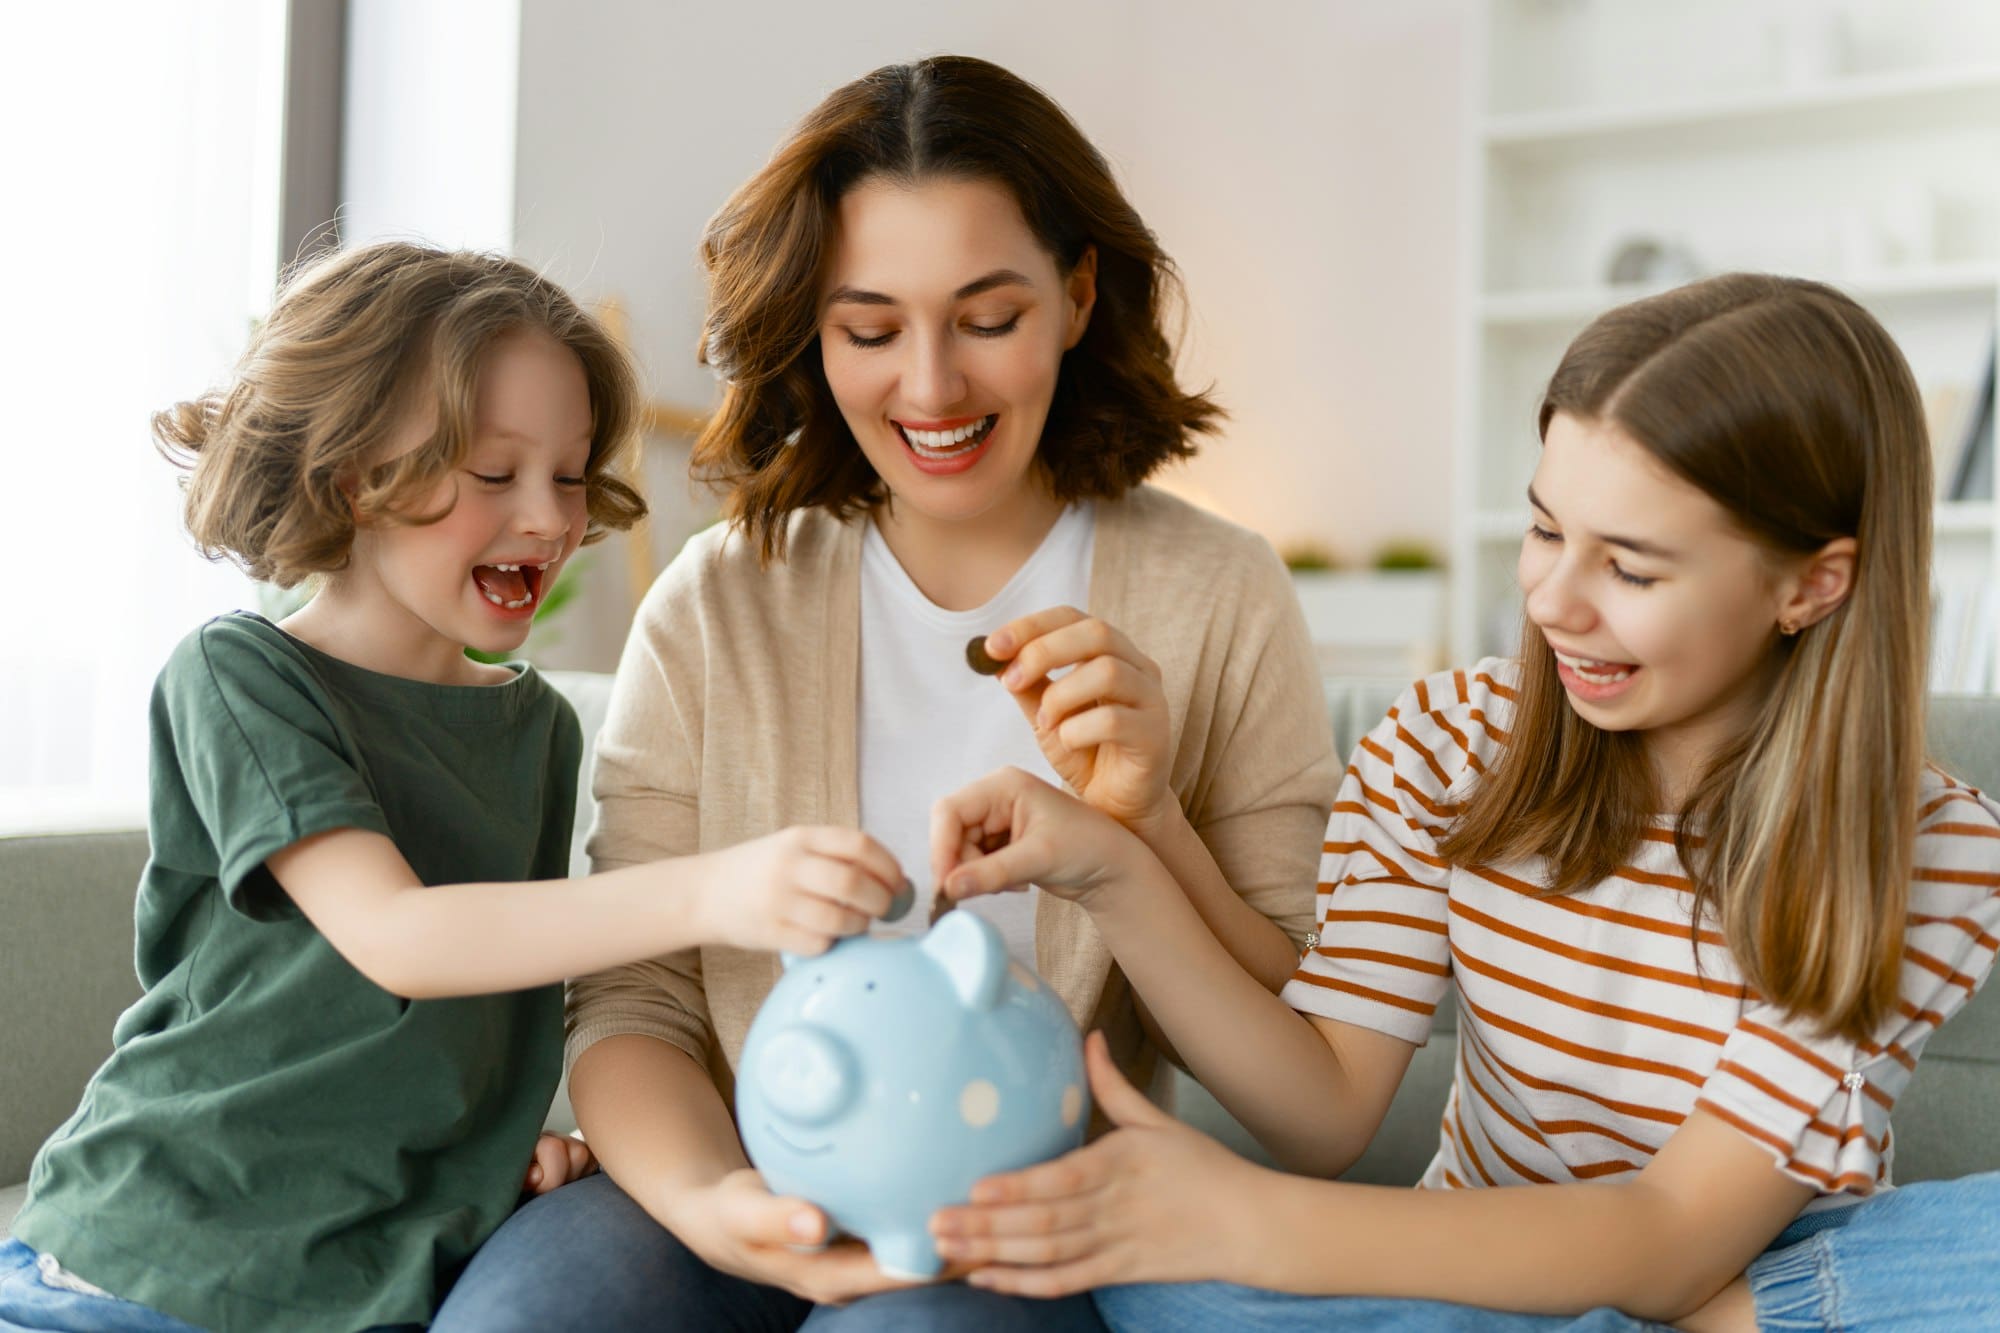 Woman and children with a piggy bank